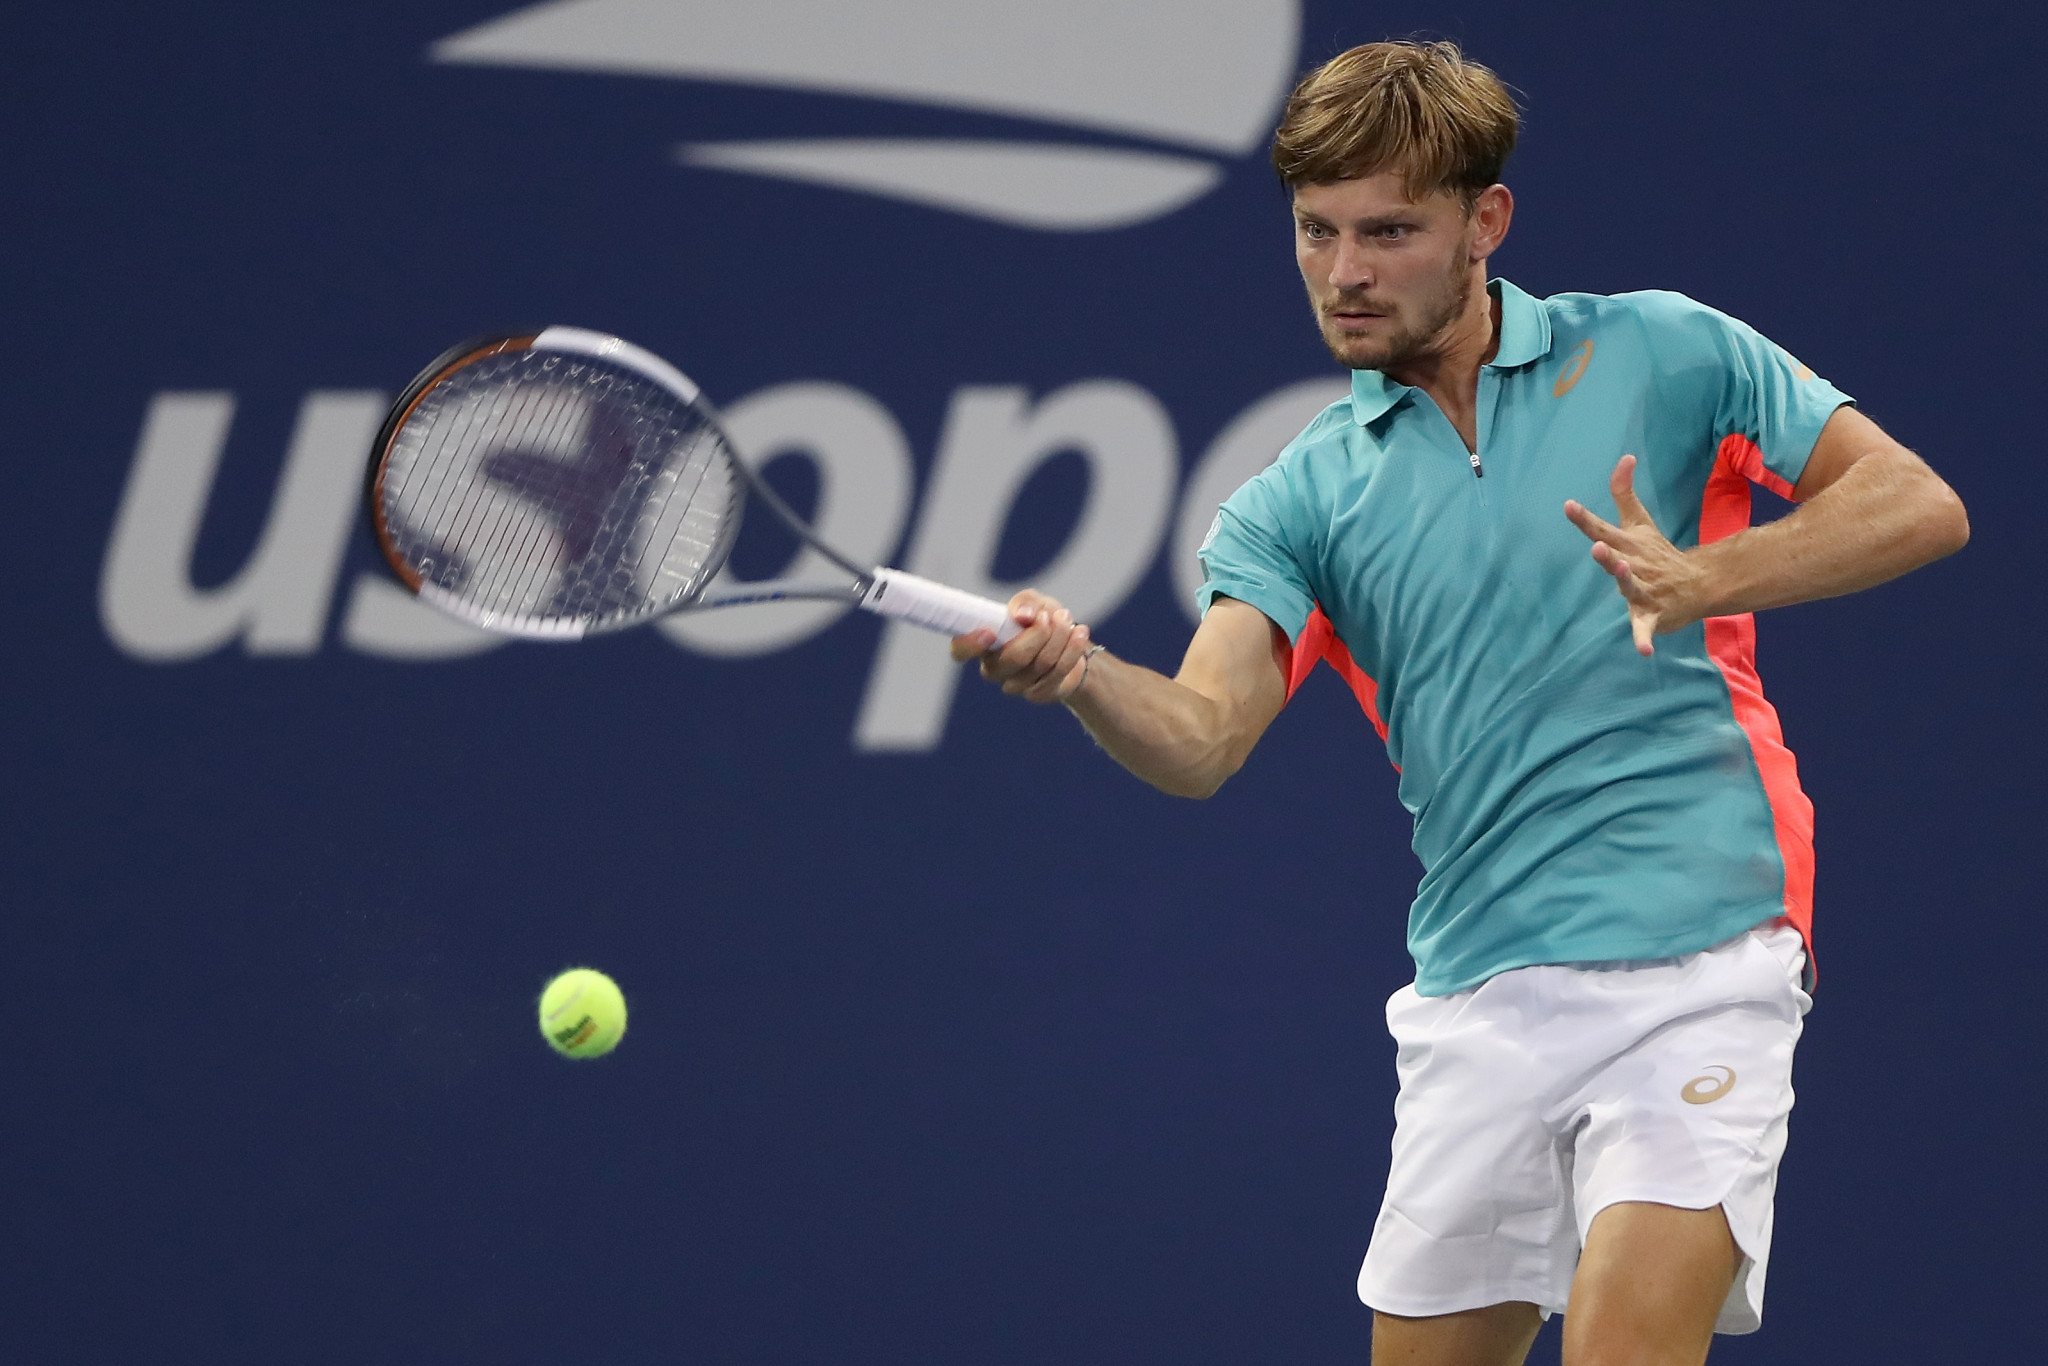 Seventh seed David Goffin of Belgium recorded a four set win to reach the third round ©Getty Images